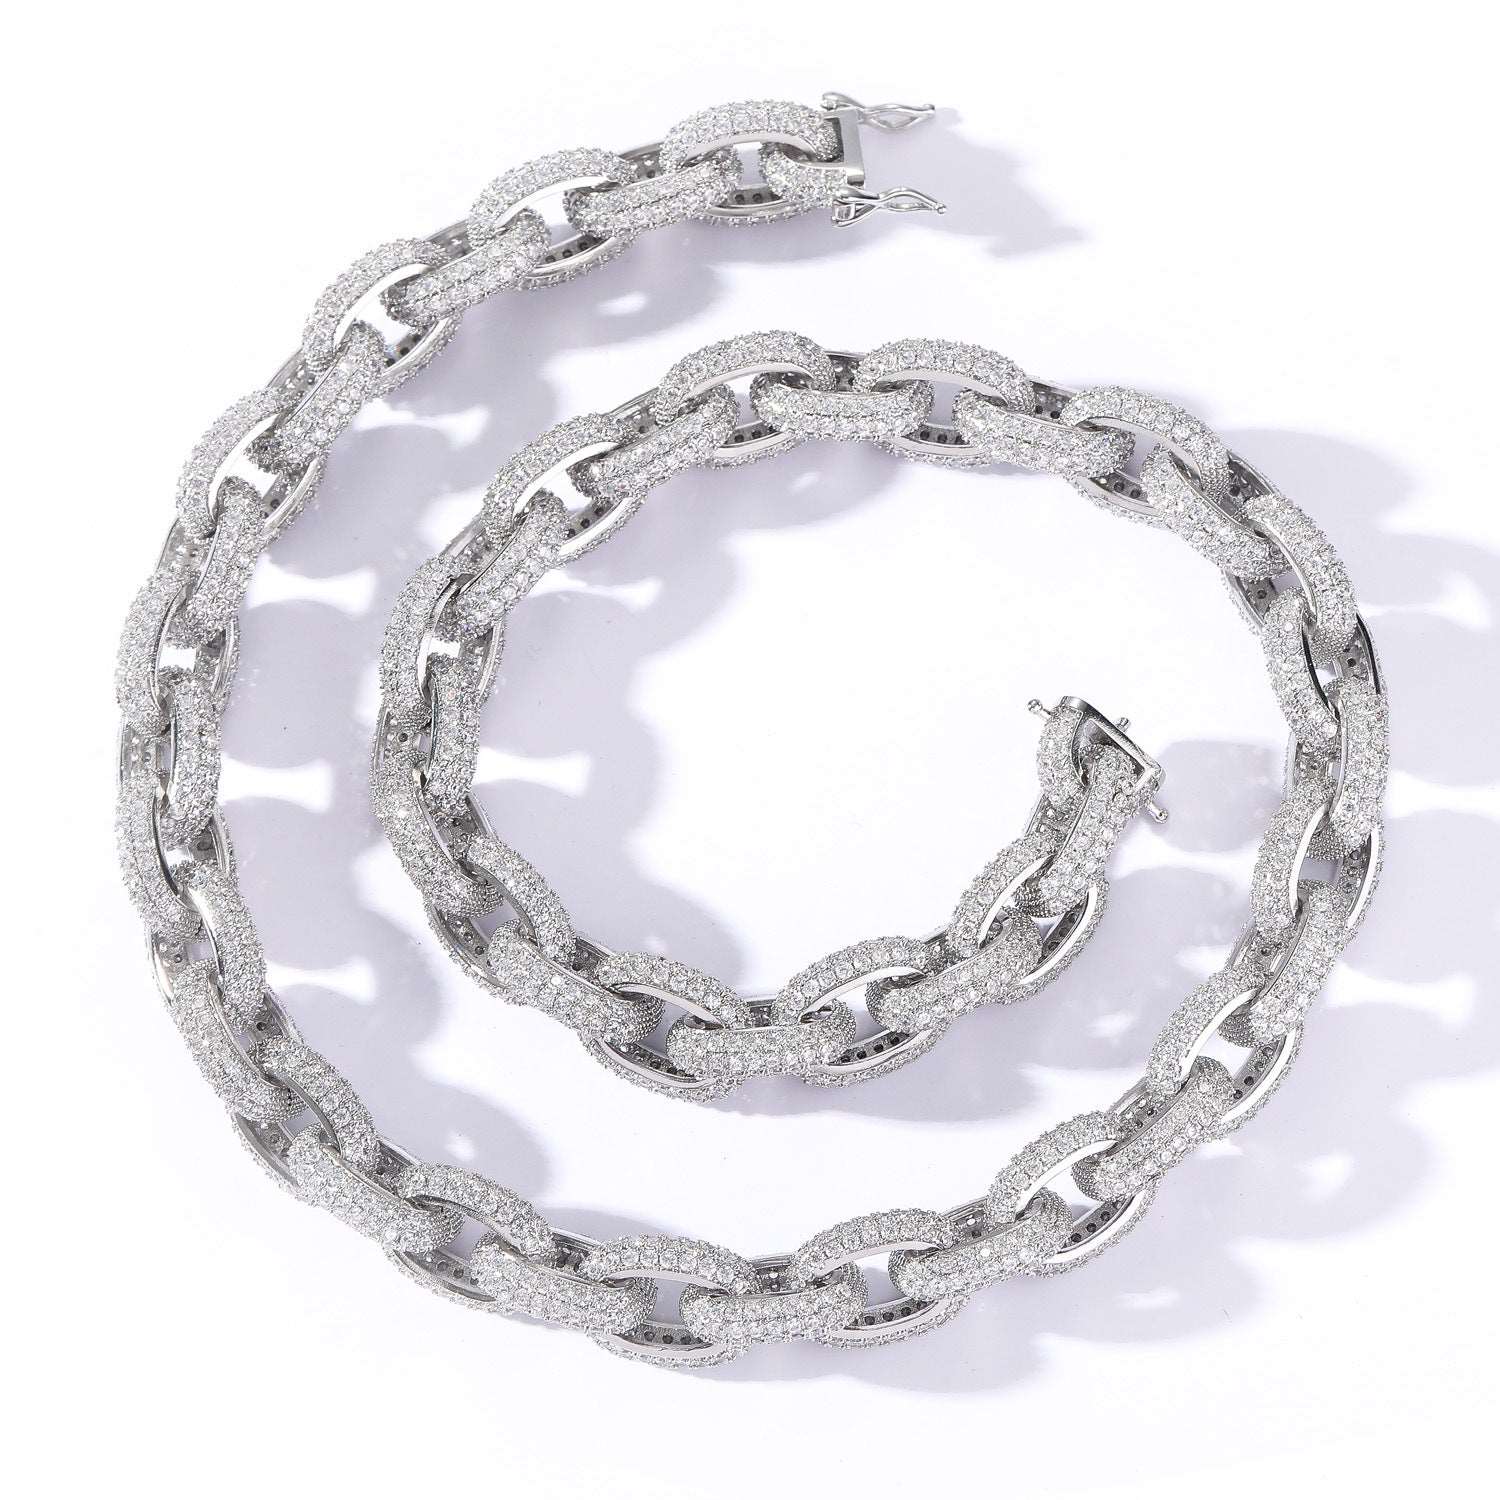 13mm Iced Oval Link Chain xccscss.